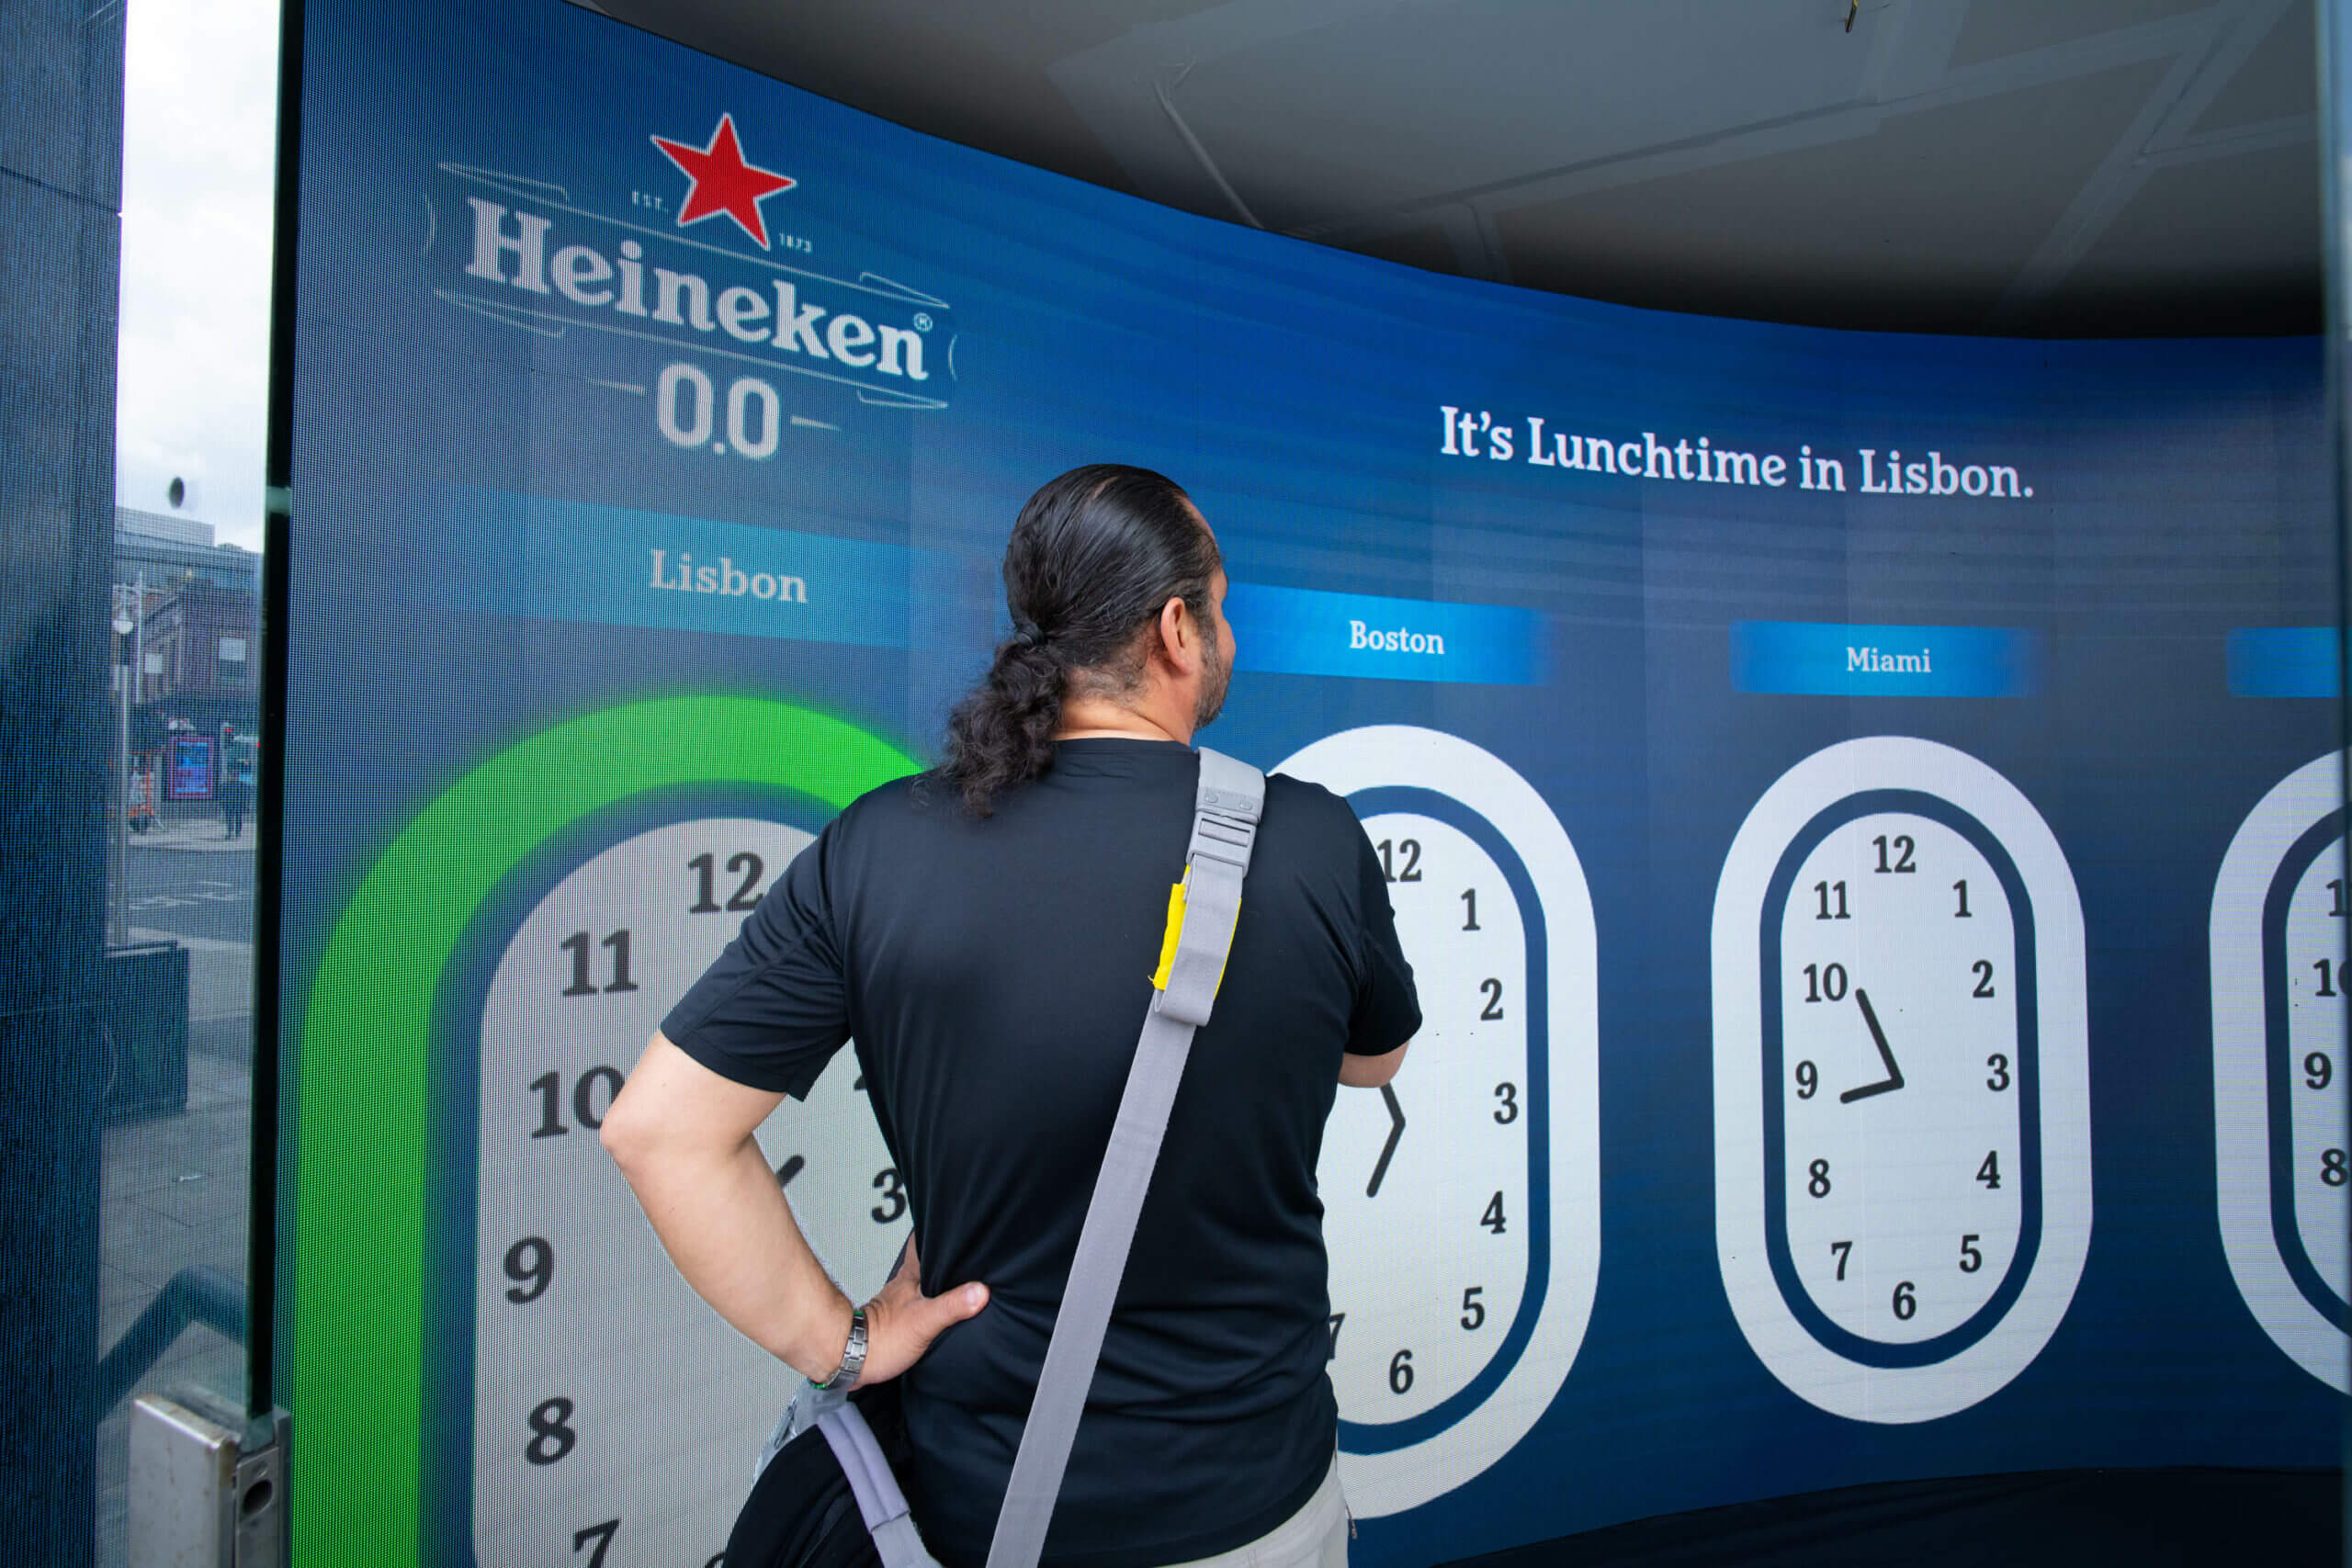 Man standing in-front of the Heineken 0.0 activation, interacting with the game